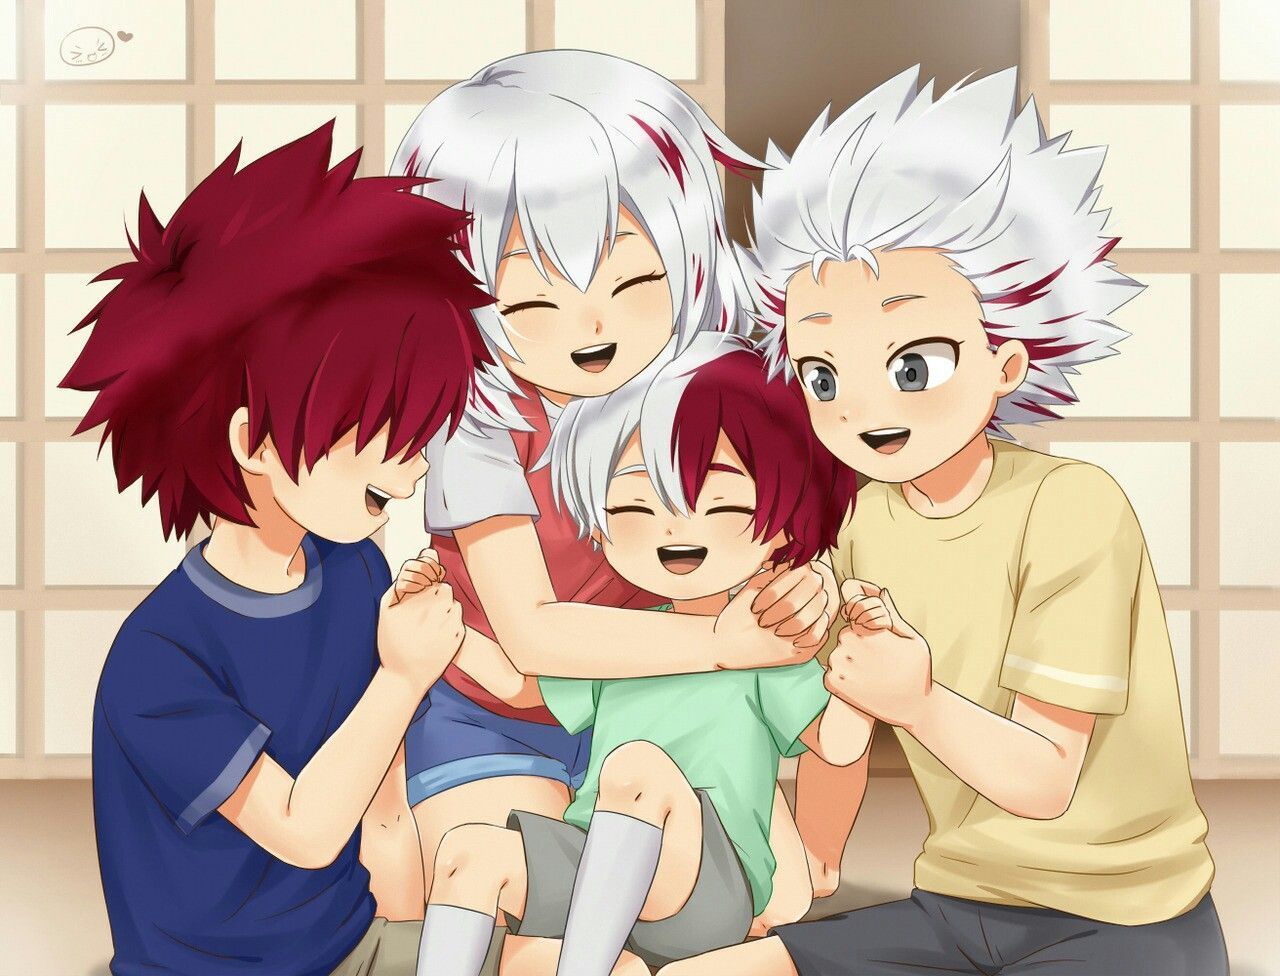 the todoroki family Search Results Image Search Results. My hero, My hero academia shouto, Hero